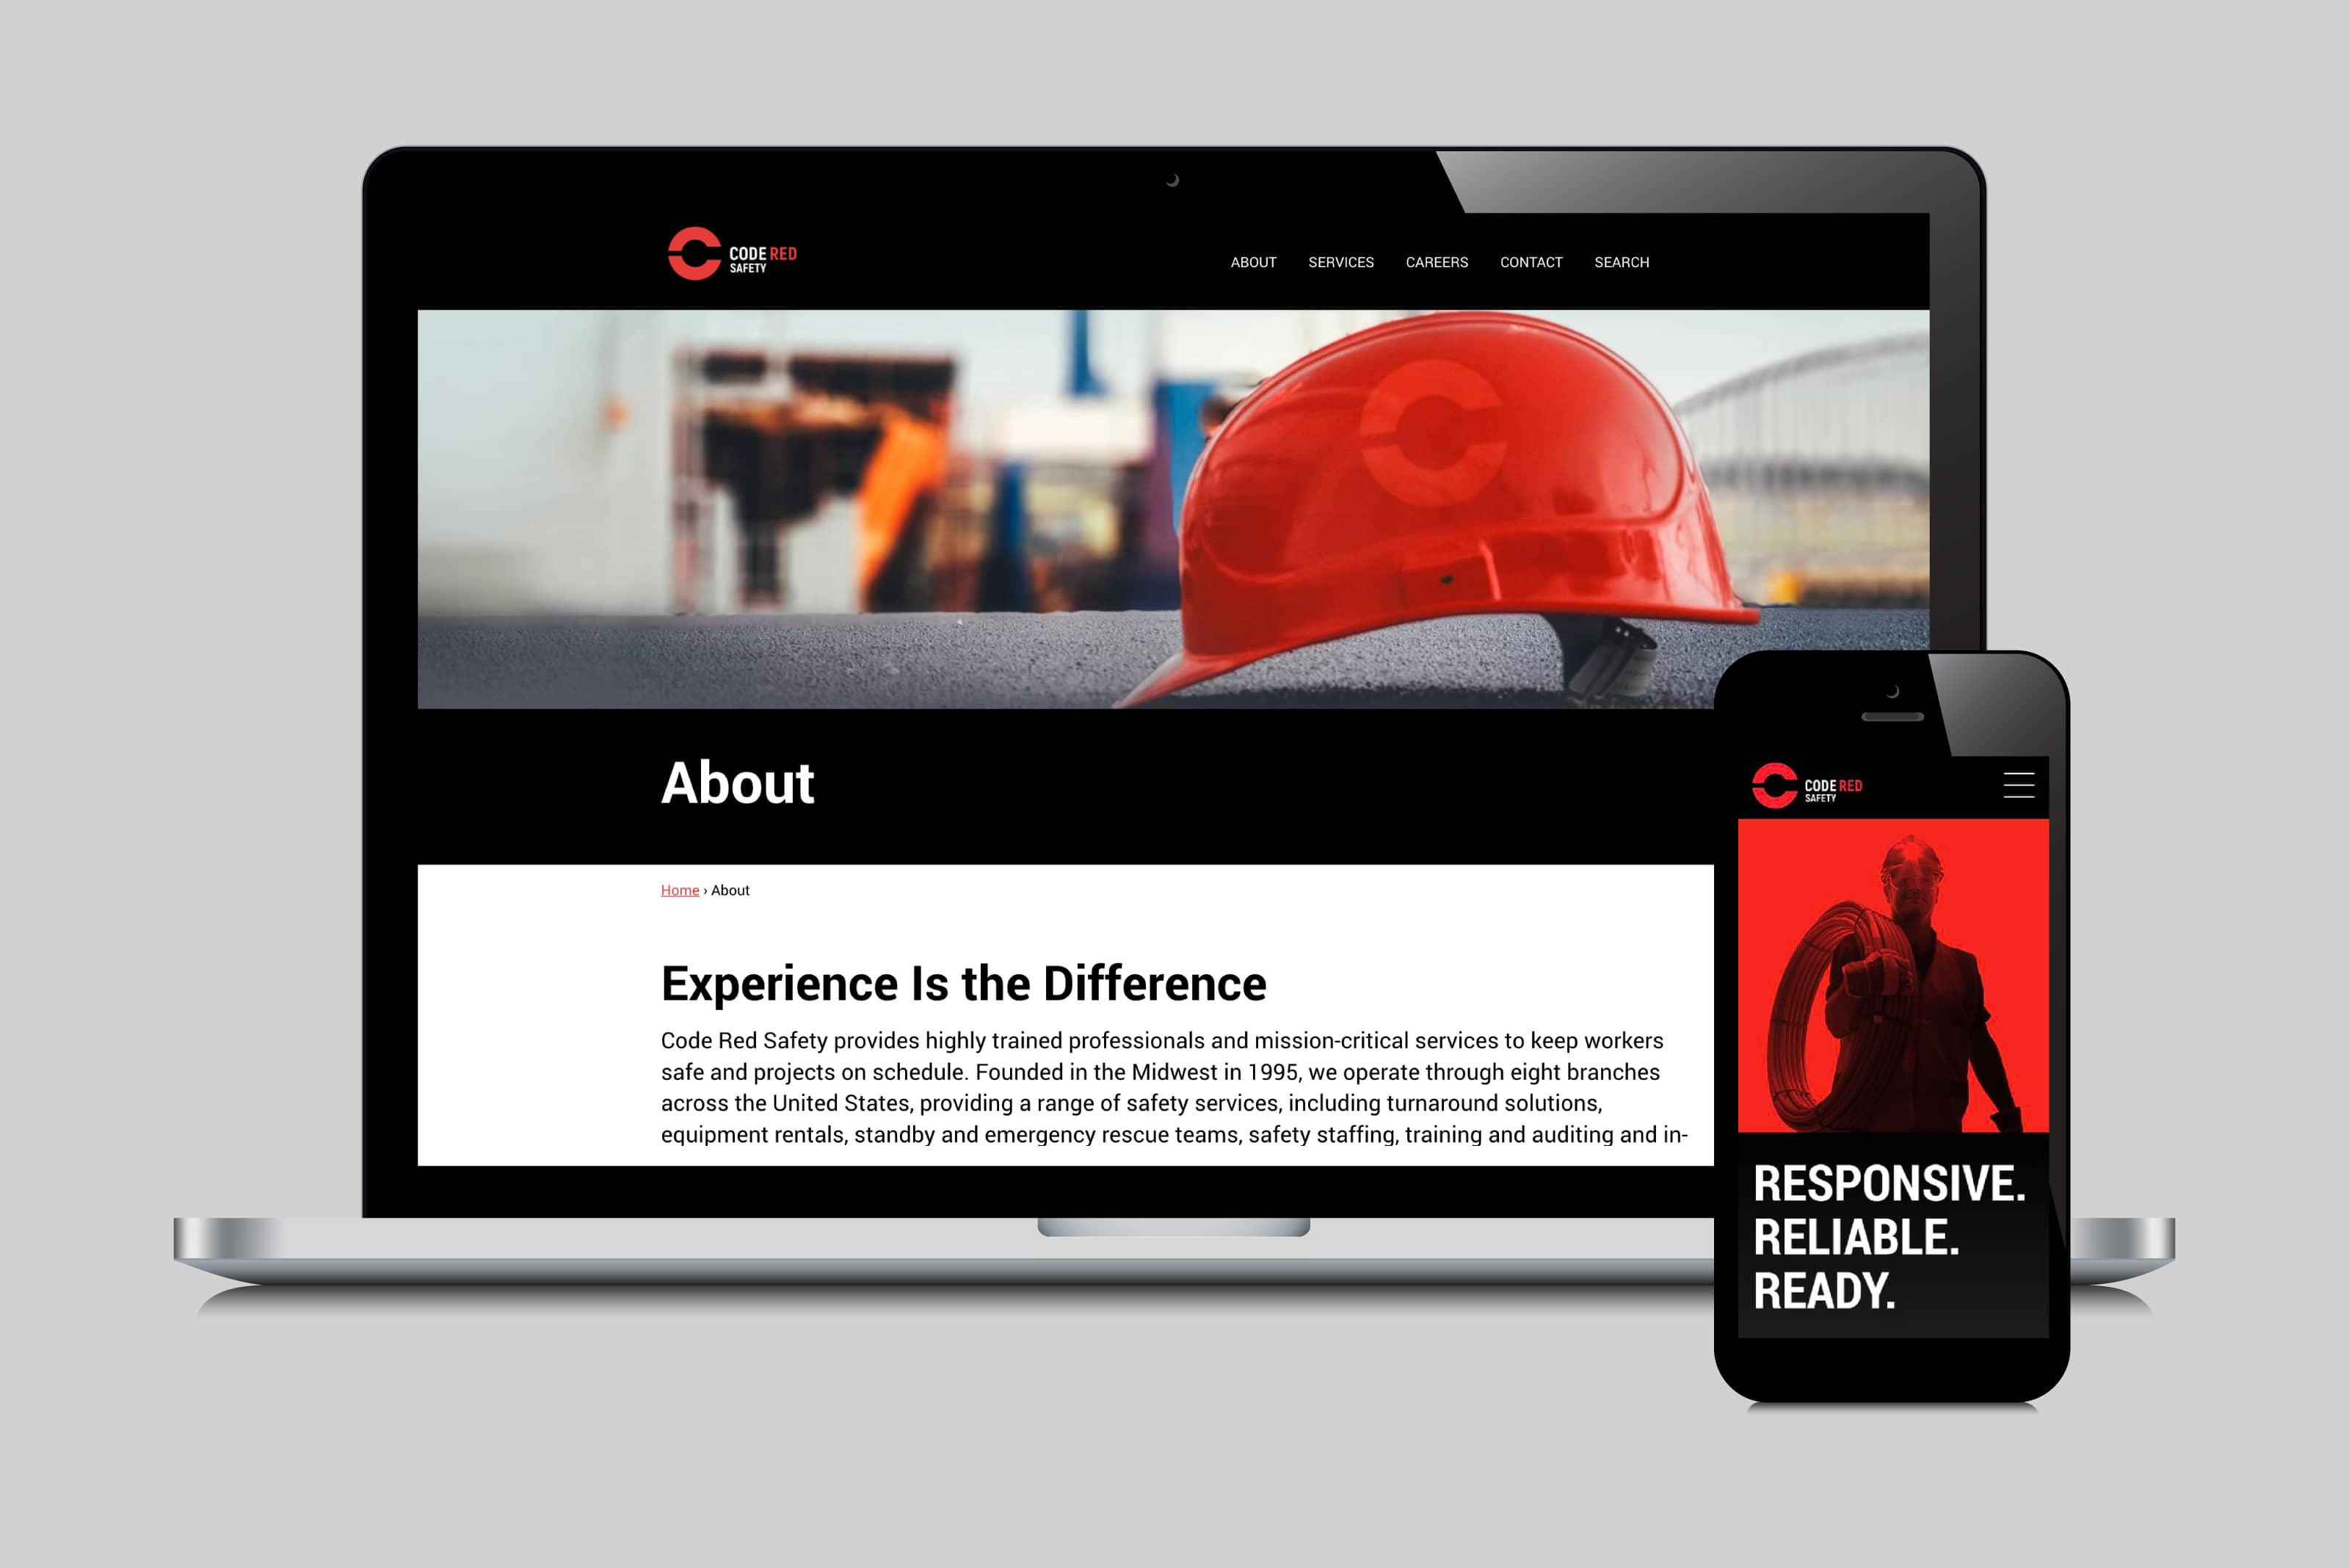 Code Red Safety's website and mobile app displayed.